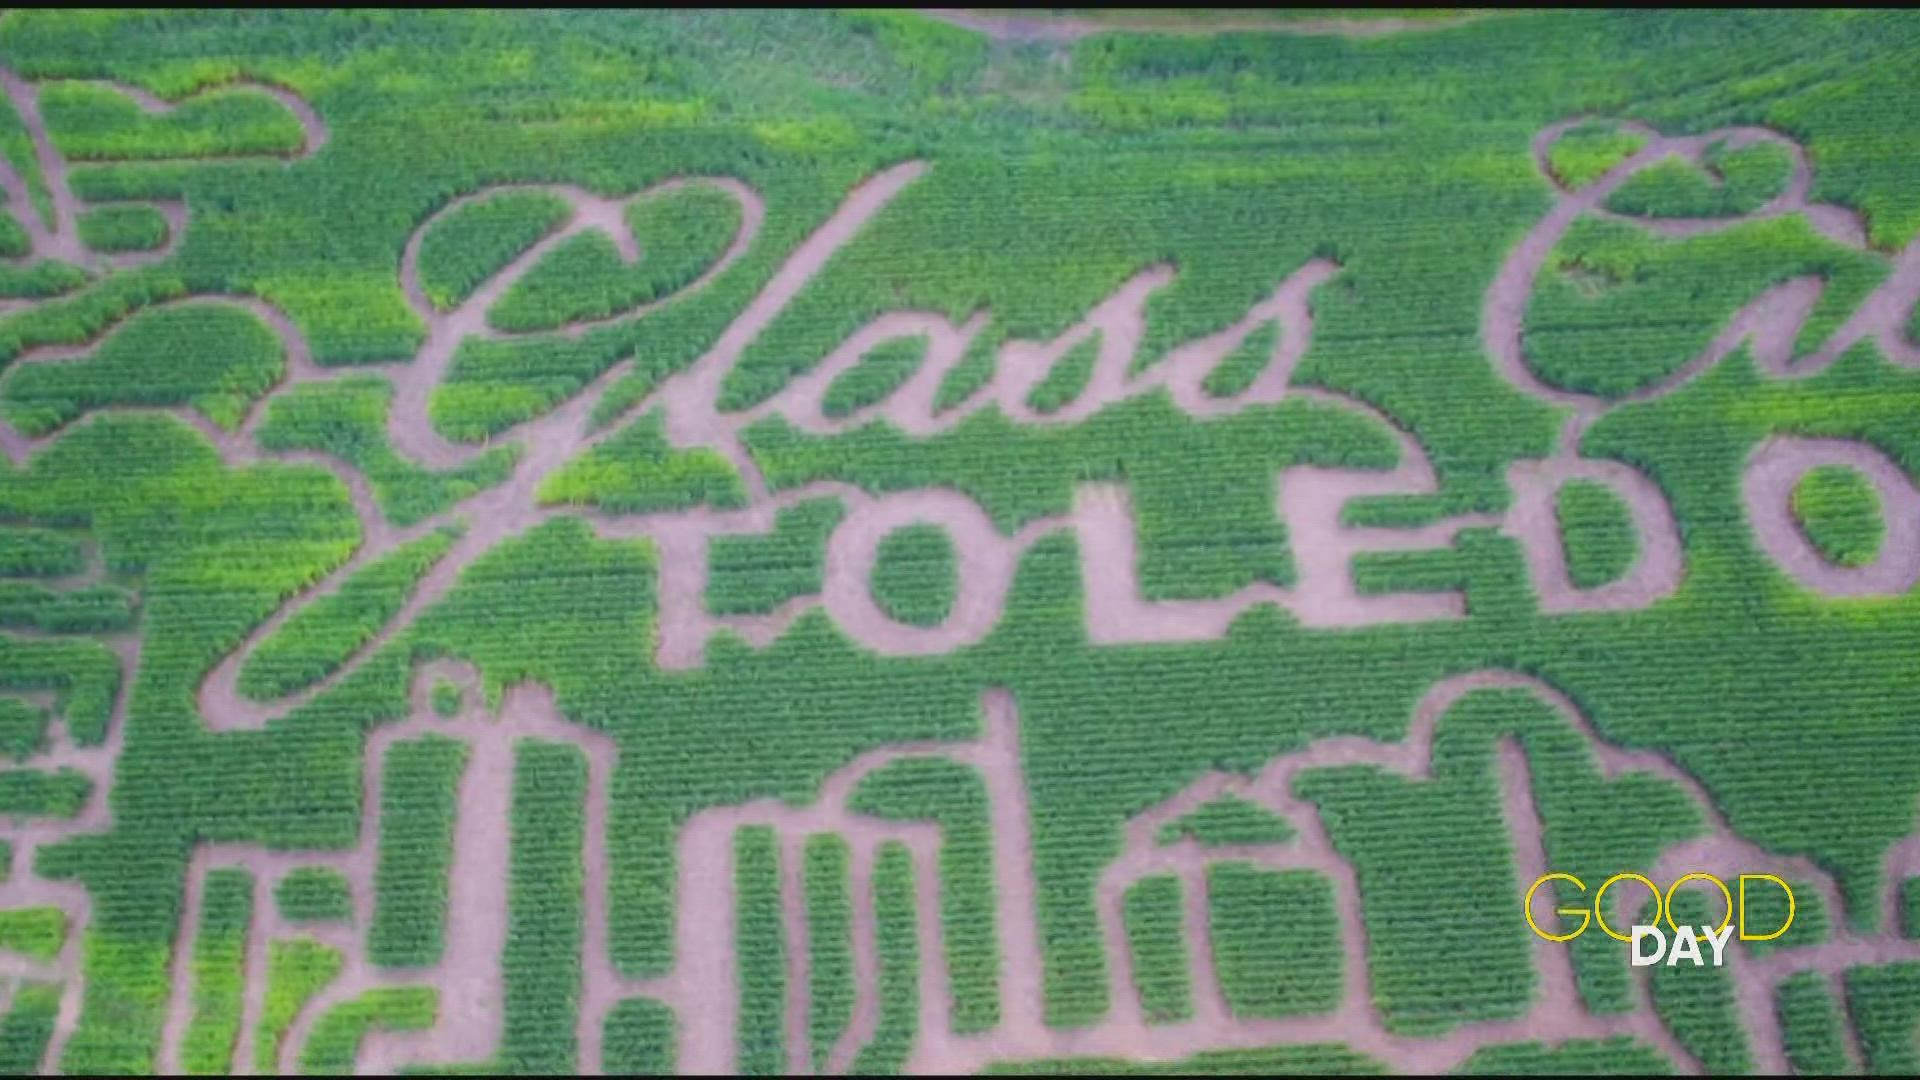 Diane checks out Wheeler Farms' fall festivities with three Toledo-themed corn mazes and more.